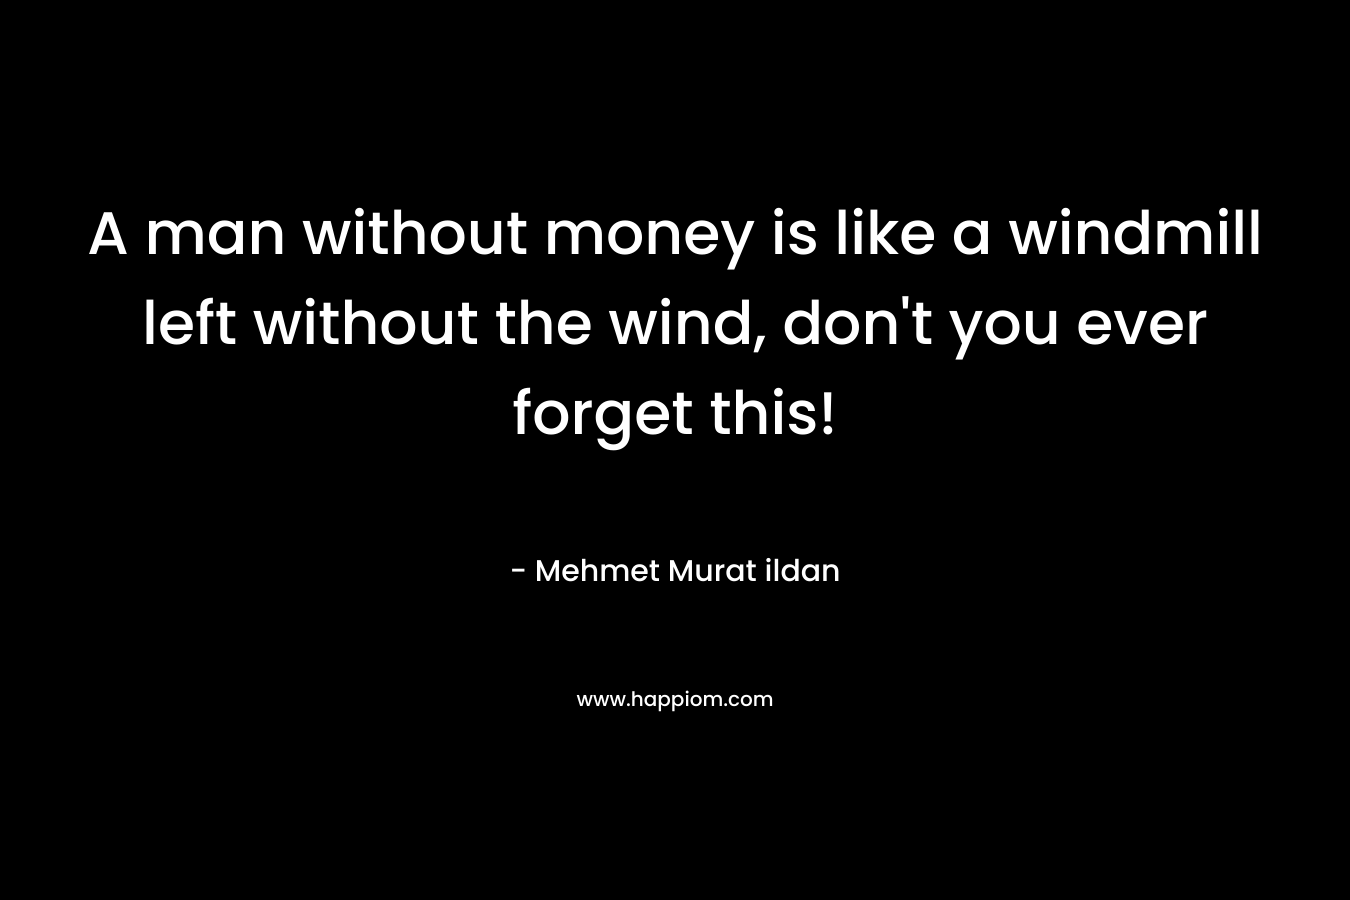 A man without money is like a windmill left without the wind, don’t you ever forget this! – Mehmet Murat ildan